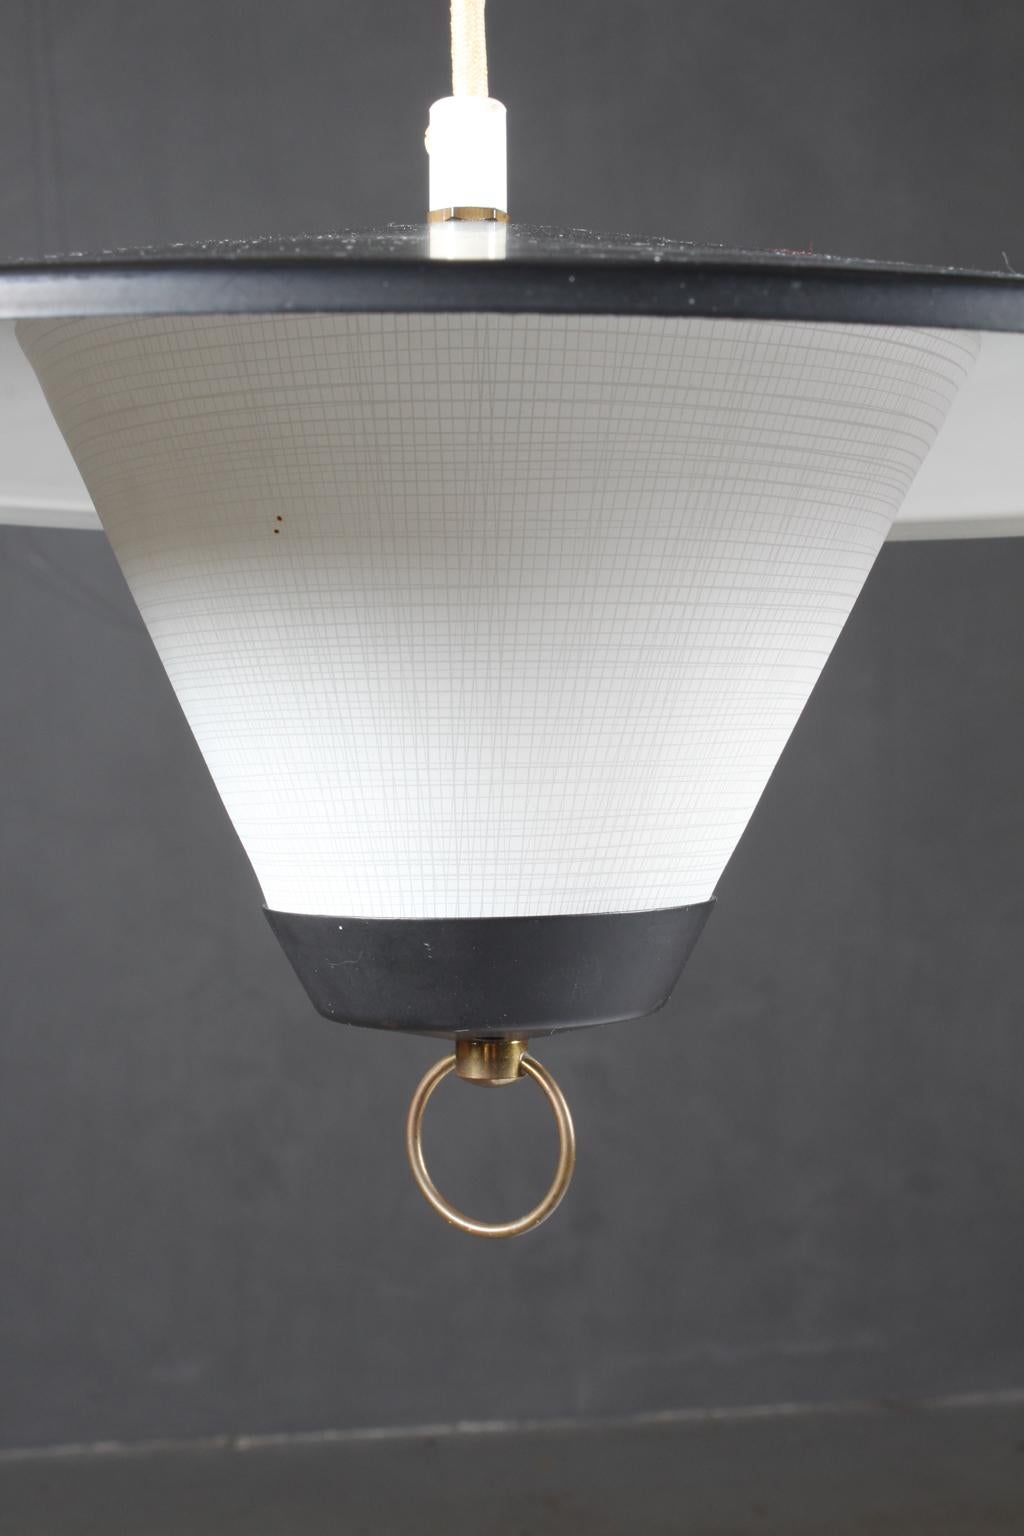 Voss pendant in brass, opaline and black lacquered steel.

Made by Voss in the 1960s.